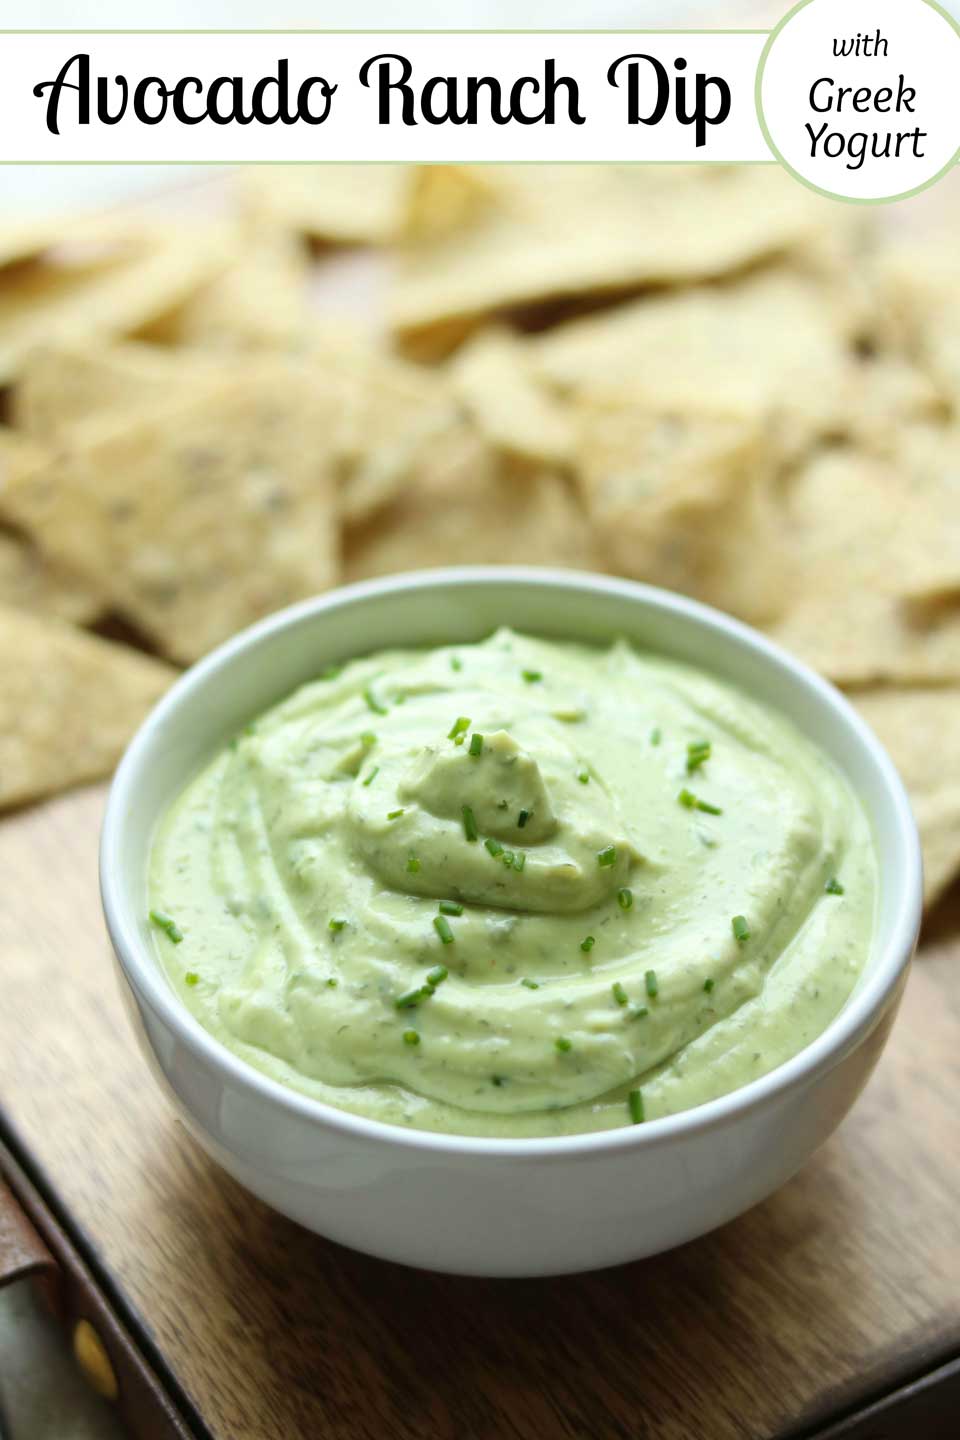 closeup photo of the dip, with text overlay reading "Avocado Ranch Dip with Greek Yogurt"